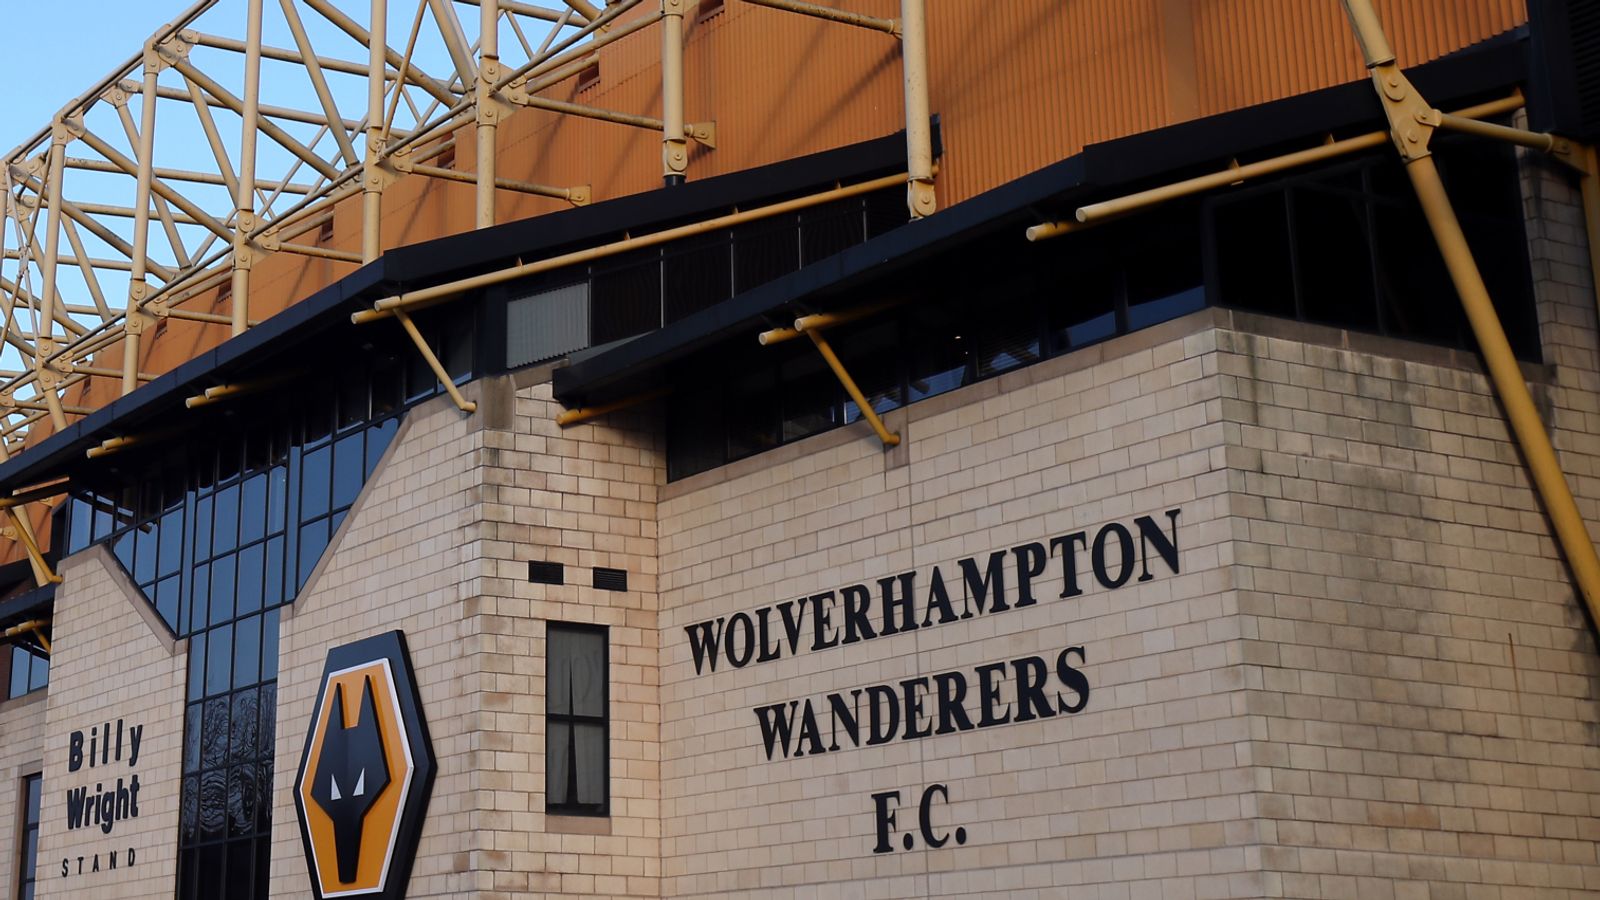 Wolves: Fire overnight at Molineux causes 'considerable damage' to stadium | Football News | Sky Sports